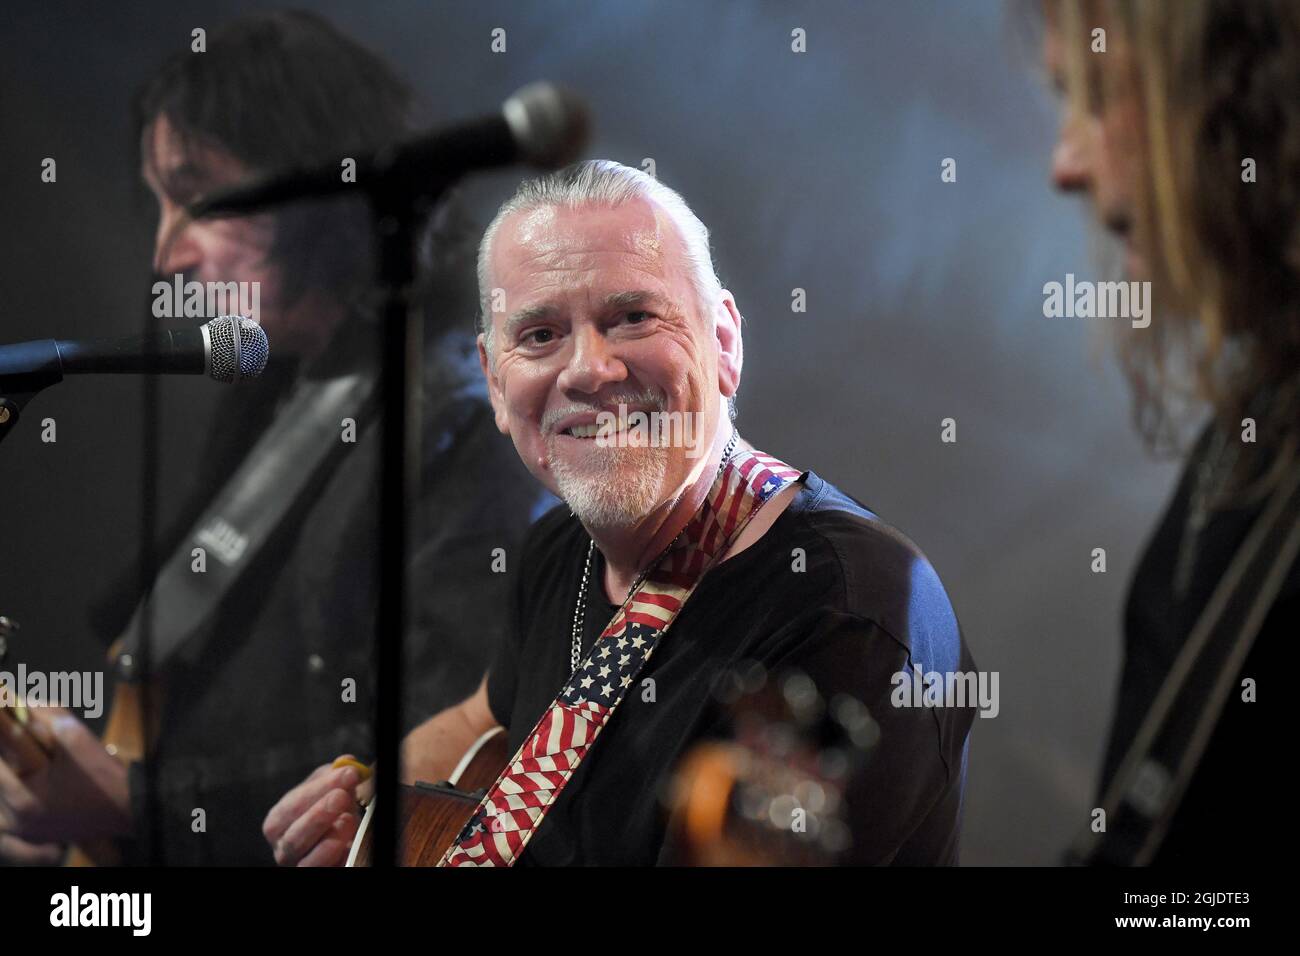 Swedish rock and metal band Alien during a live-streamed concert from Qtech  in Partille, Sweden, on November 26, 2020. Photo: Tommy Holl / TT code 2391  Stock Photo - Alamy